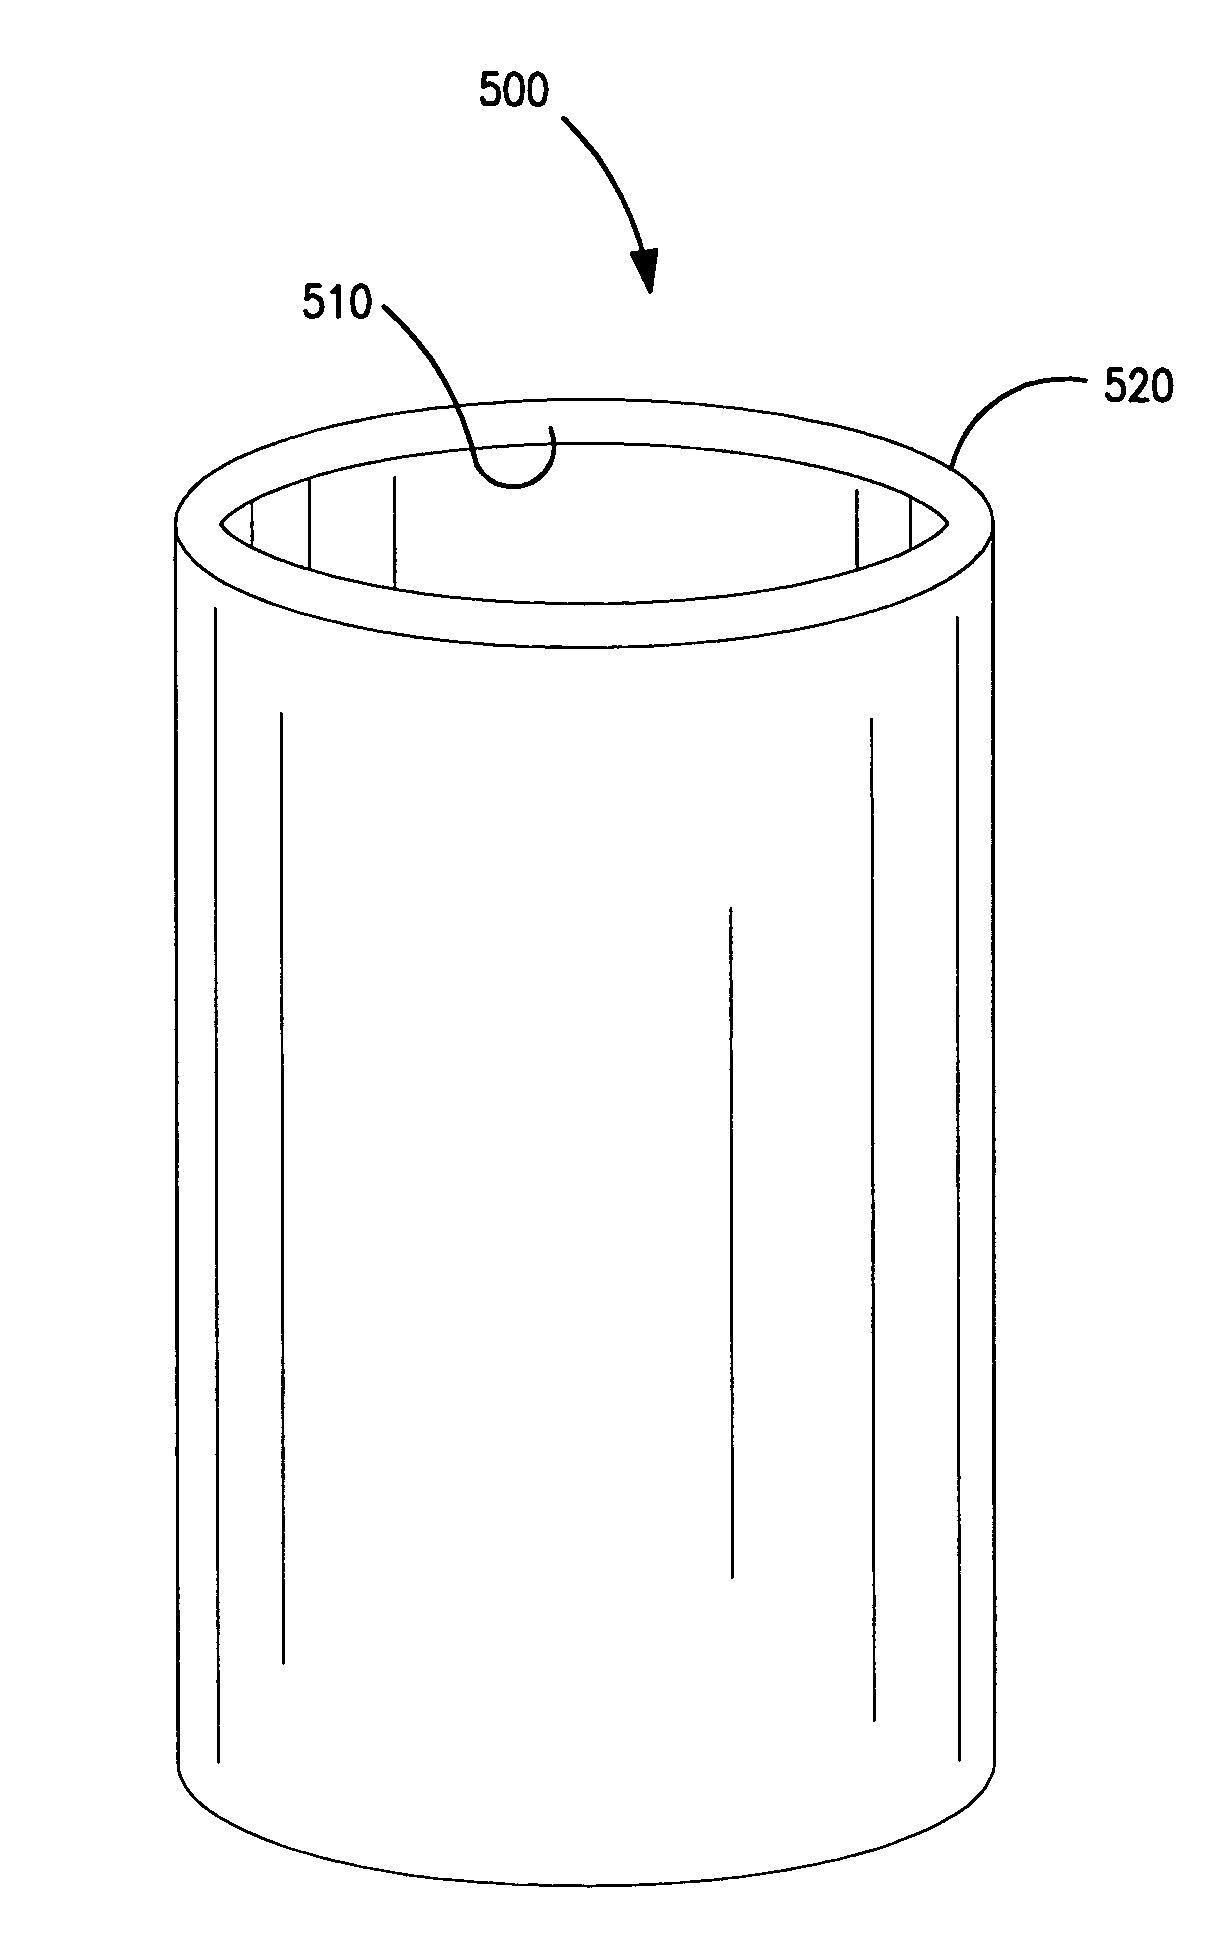 Conductive tube for use as a reflectron lens